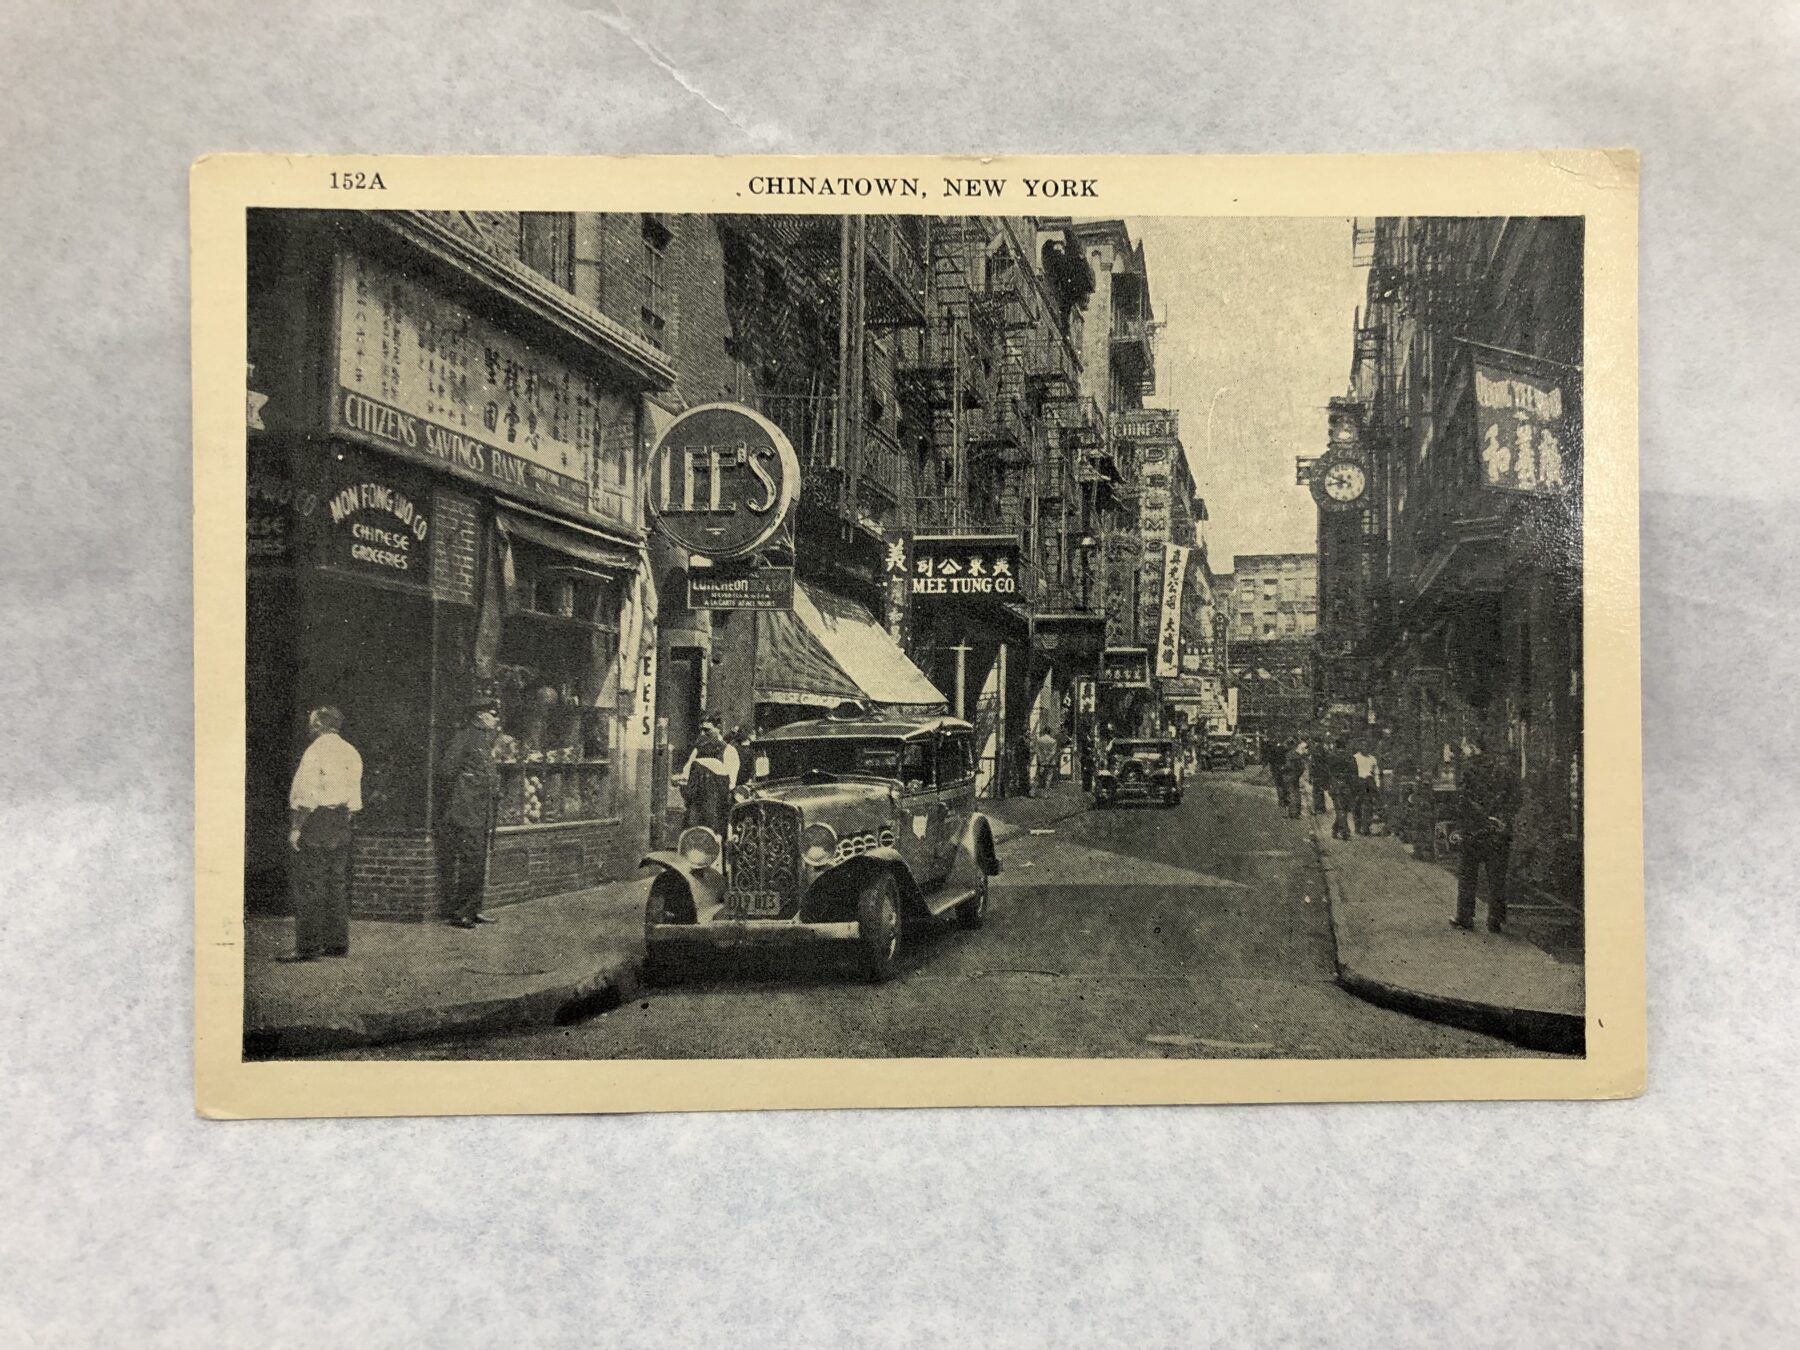 A postcard of Lee's Restaurant, with a shot of the exterior and unique circular sign. Courtesy of Alex Jay. Museum of Chinese in America (MOCA) Collection.